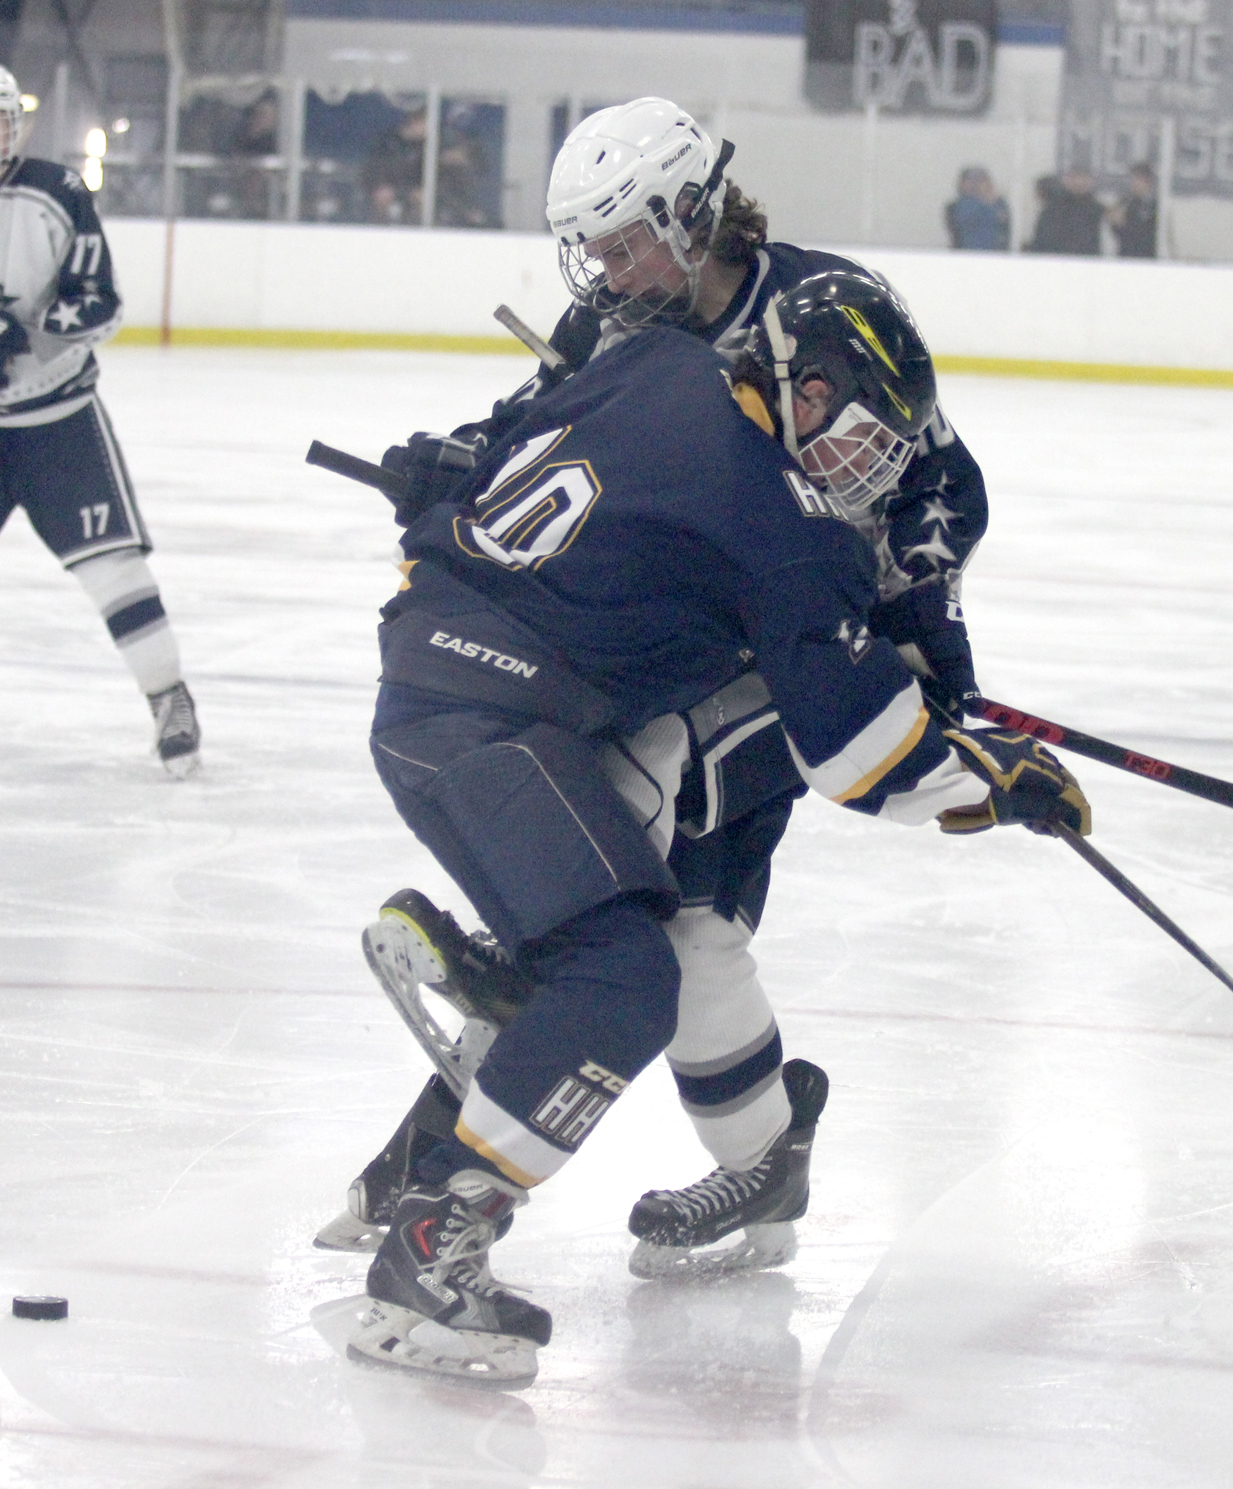 Soldotna’s Braxton Urban gets tied up with Homer’s Spencer Warren during a 2-1 win over the Marinters on the first day of the North Star Conference Championships Thursday at the MTA Events Center in Palmer. With the win, Soldotna moves forward to play second-seeded Colony in the semifinals. (Photo by Jeremiah Bartz/Frontiersman.com)